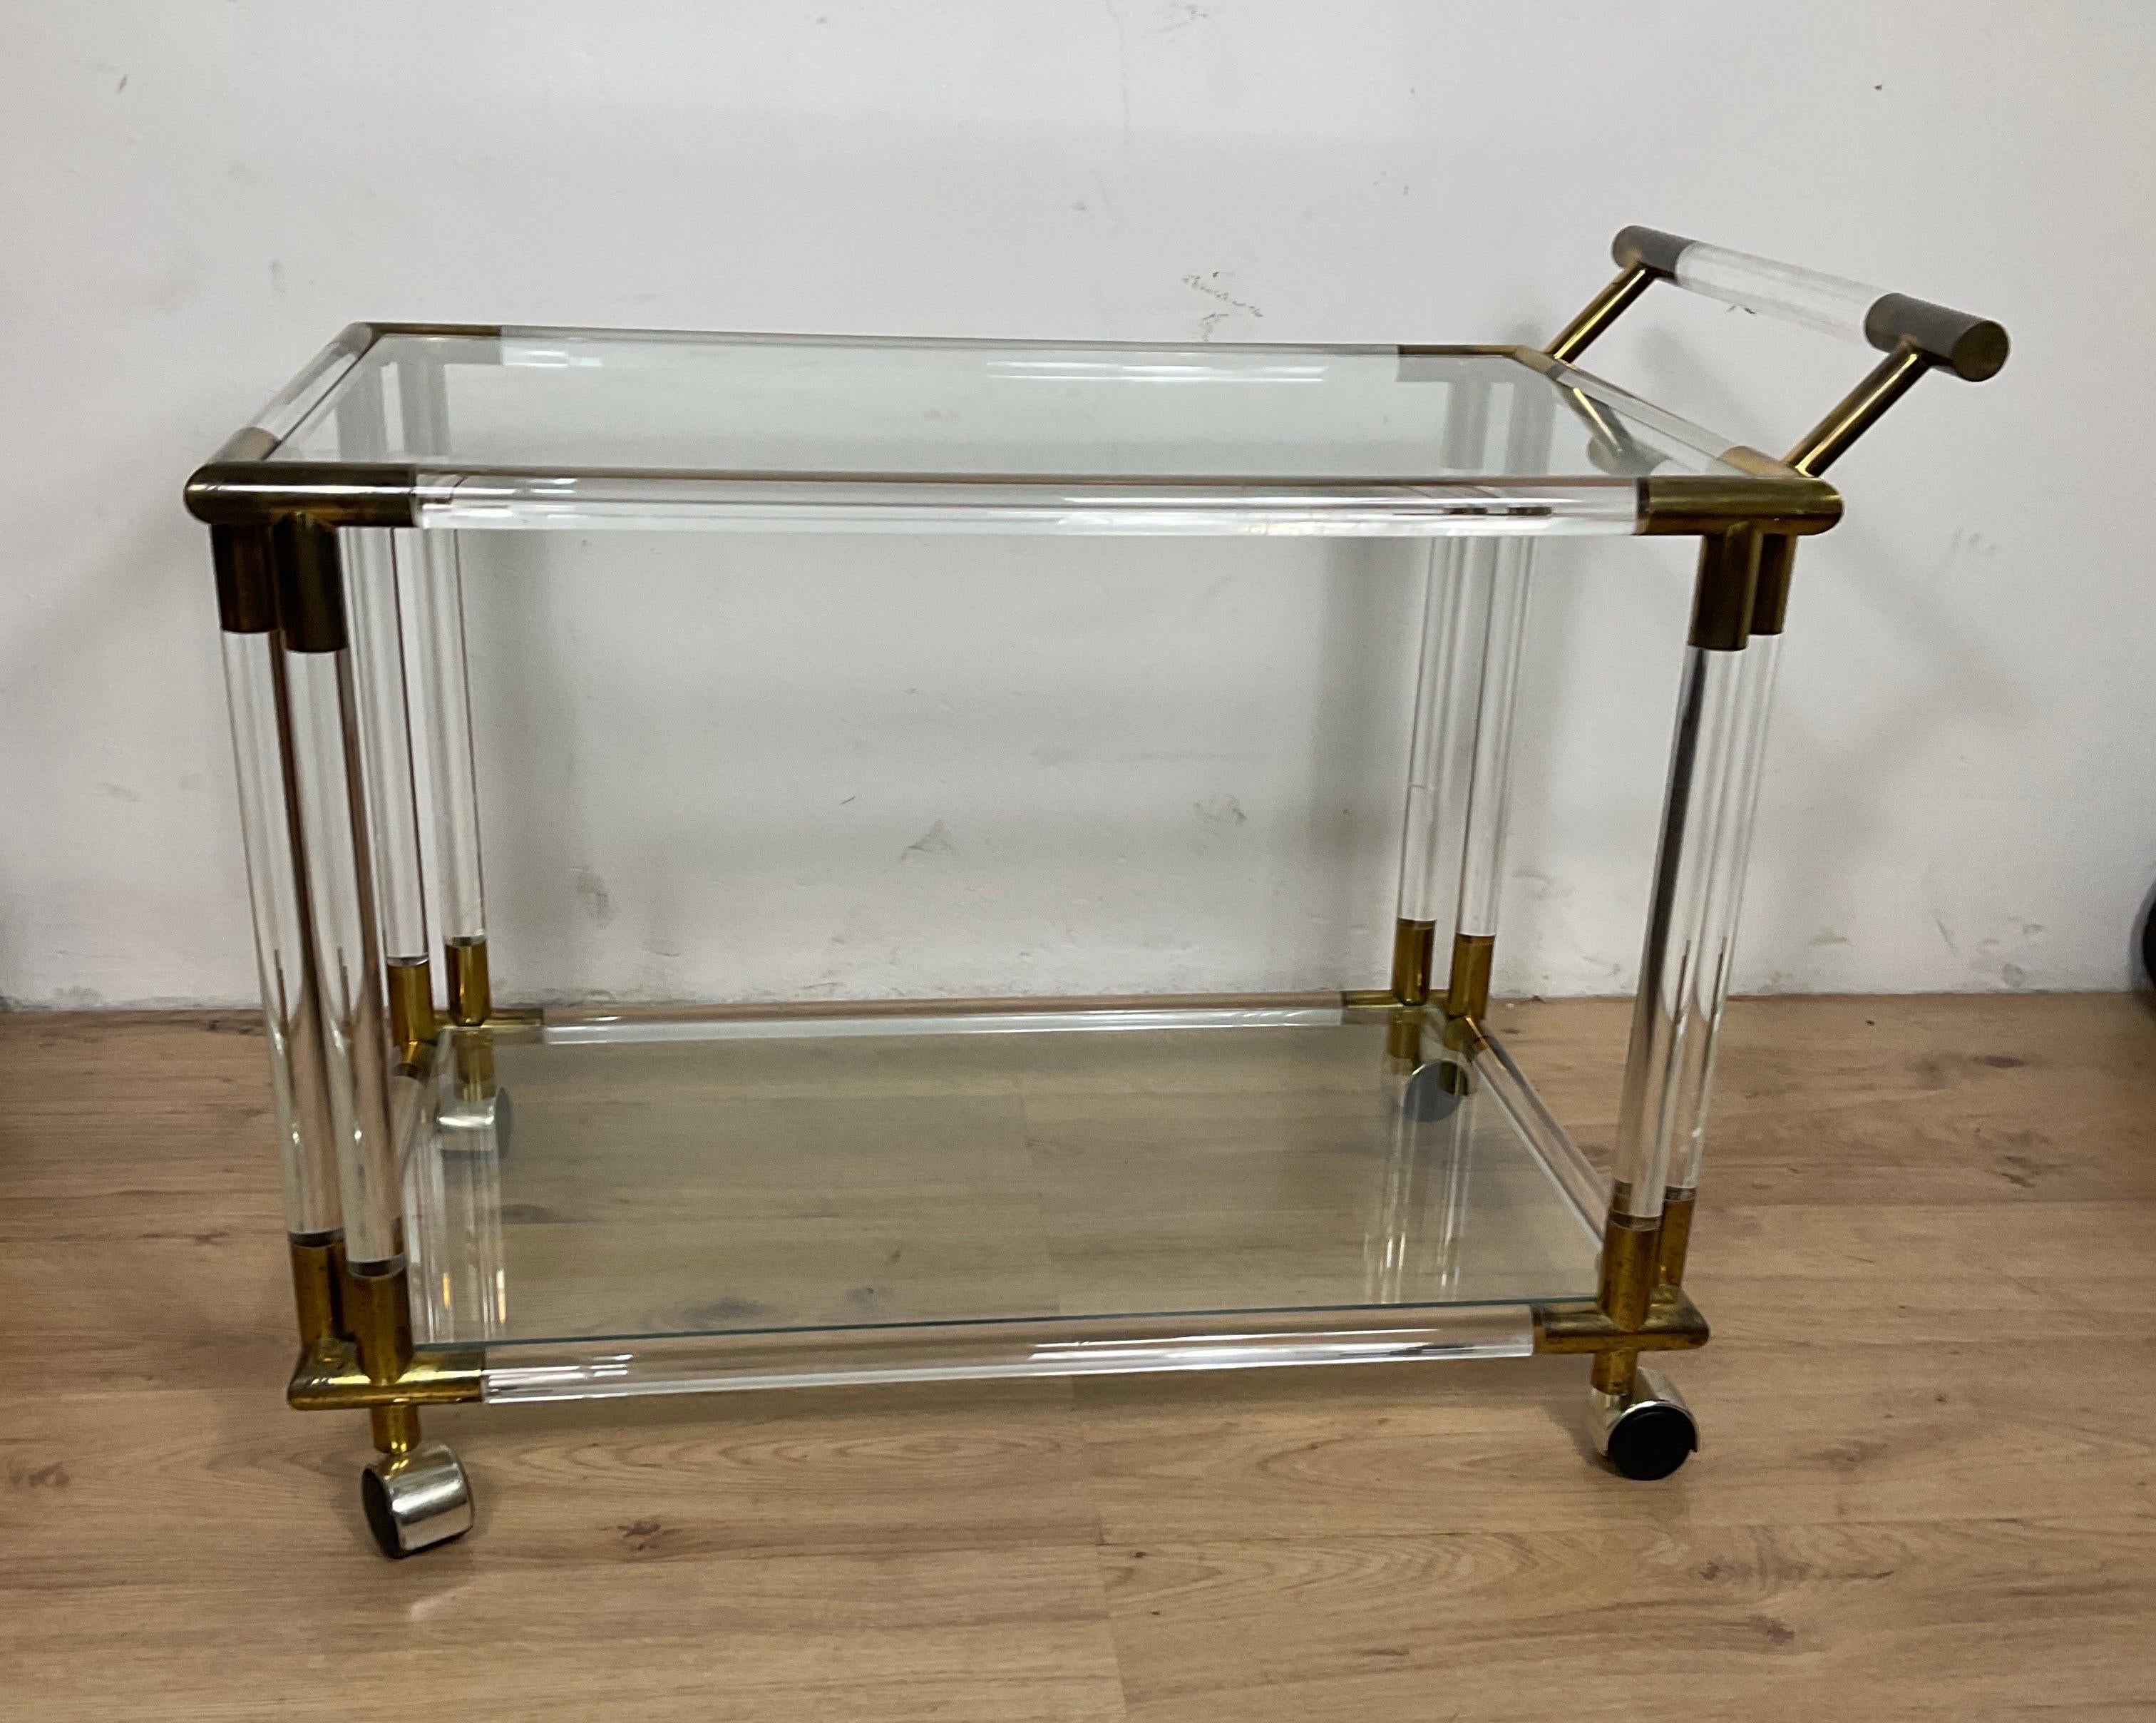 A stunning lucite and glass designer bar/tea cart with brass accents on quality casters